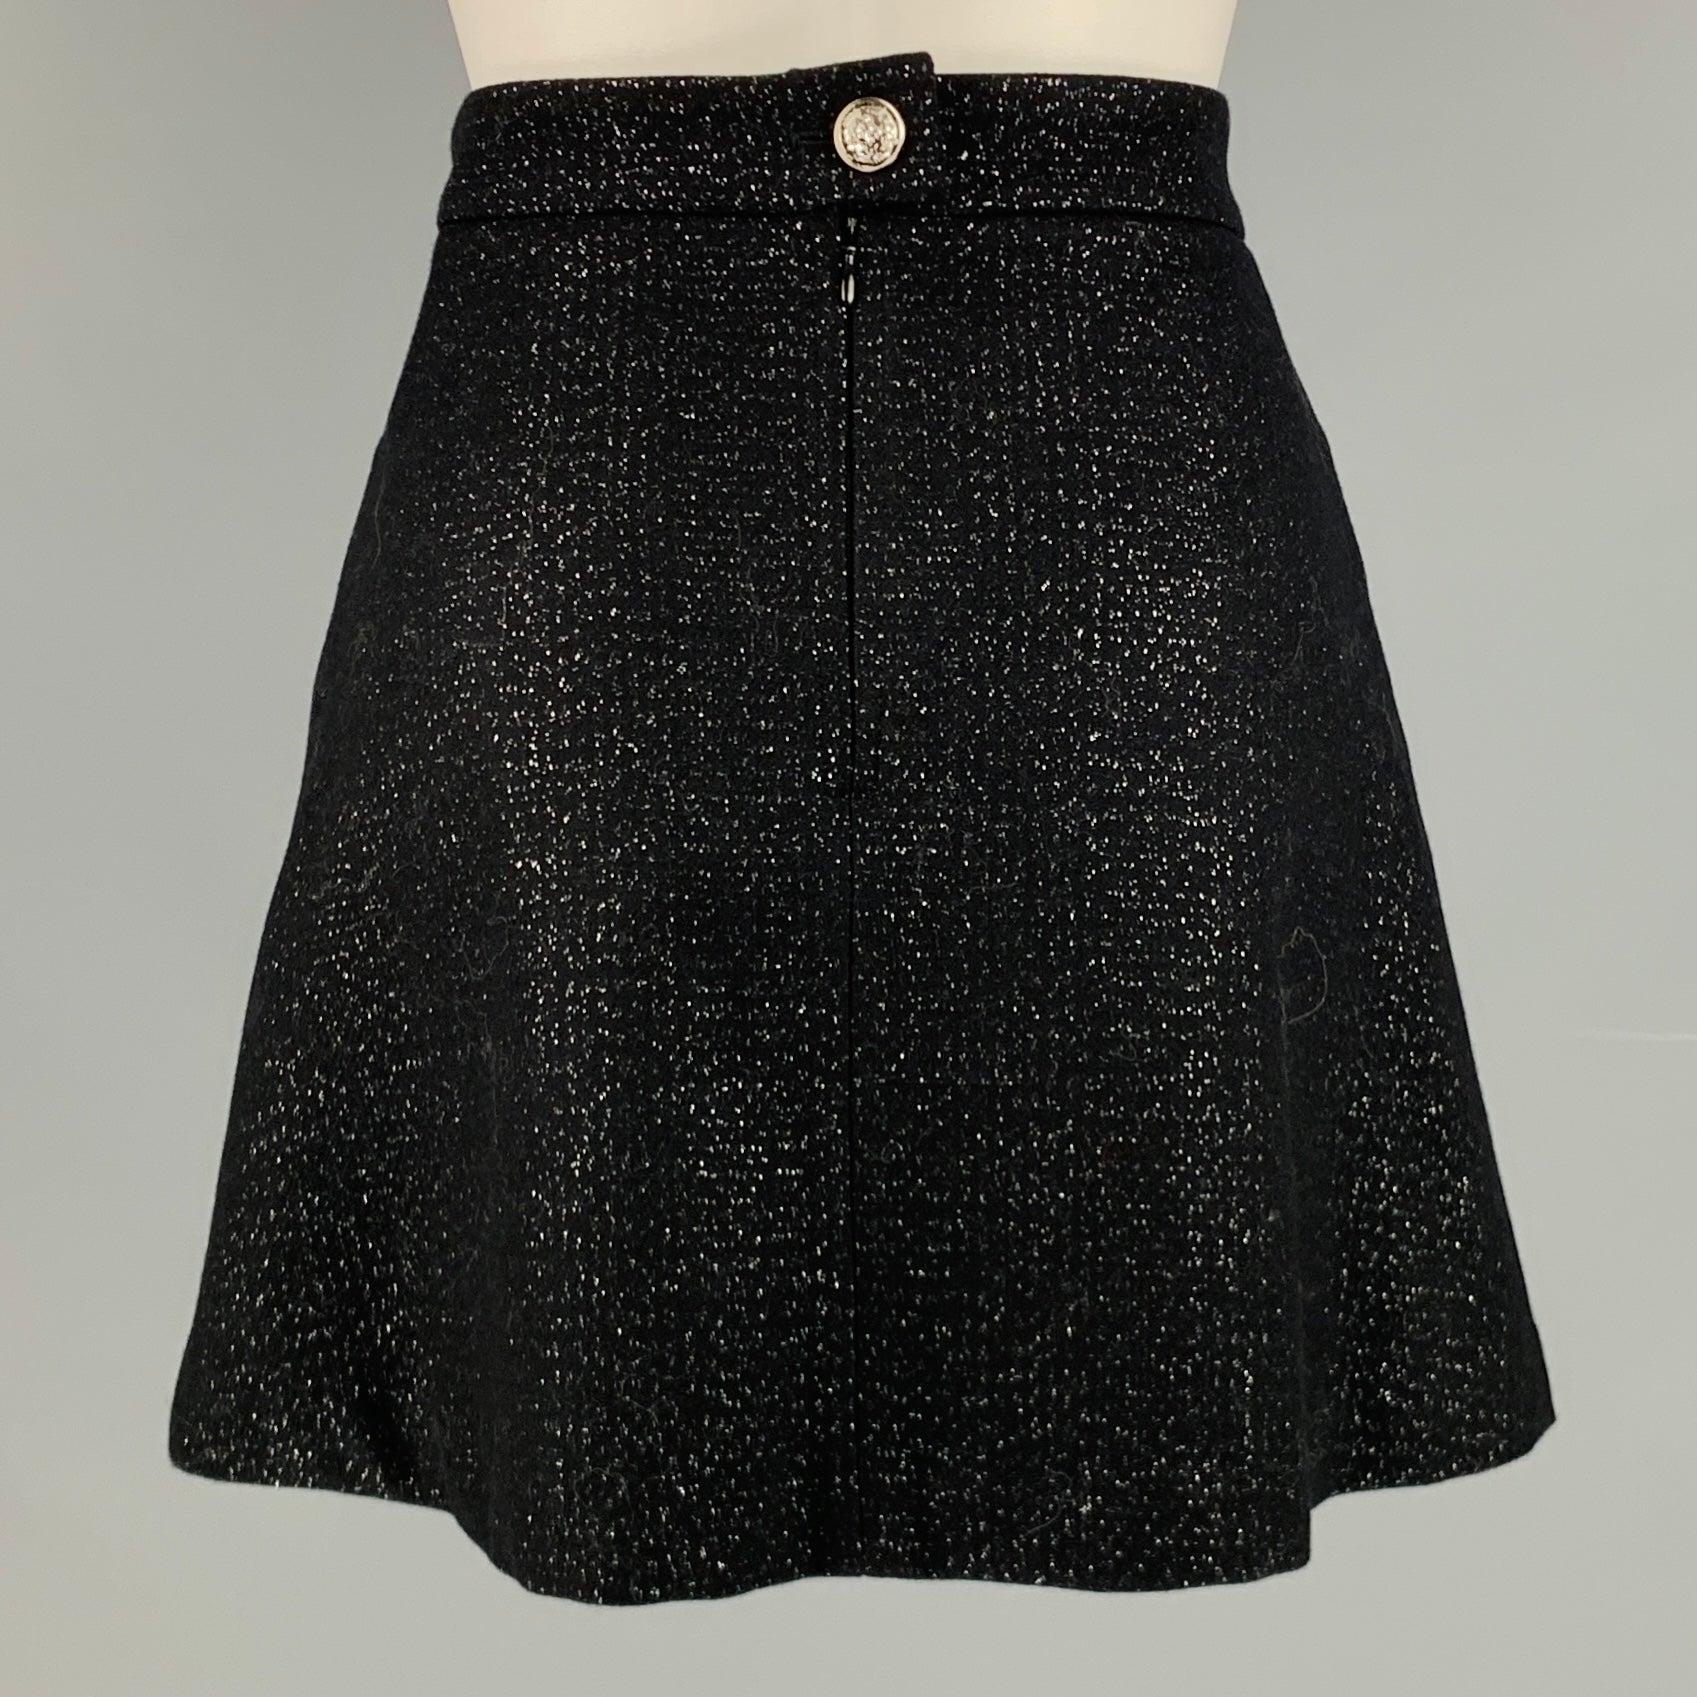 ZADIG & VOLTAIRE skirt
in a black wool blend featuring a mini length, silver tone metallic details throughout, two pockets, and back zipper closure. Made in Romania.Excellent Pre-Owned Condition. 

Marked:   6 

Measurements: 
  Waist: 27
 inches